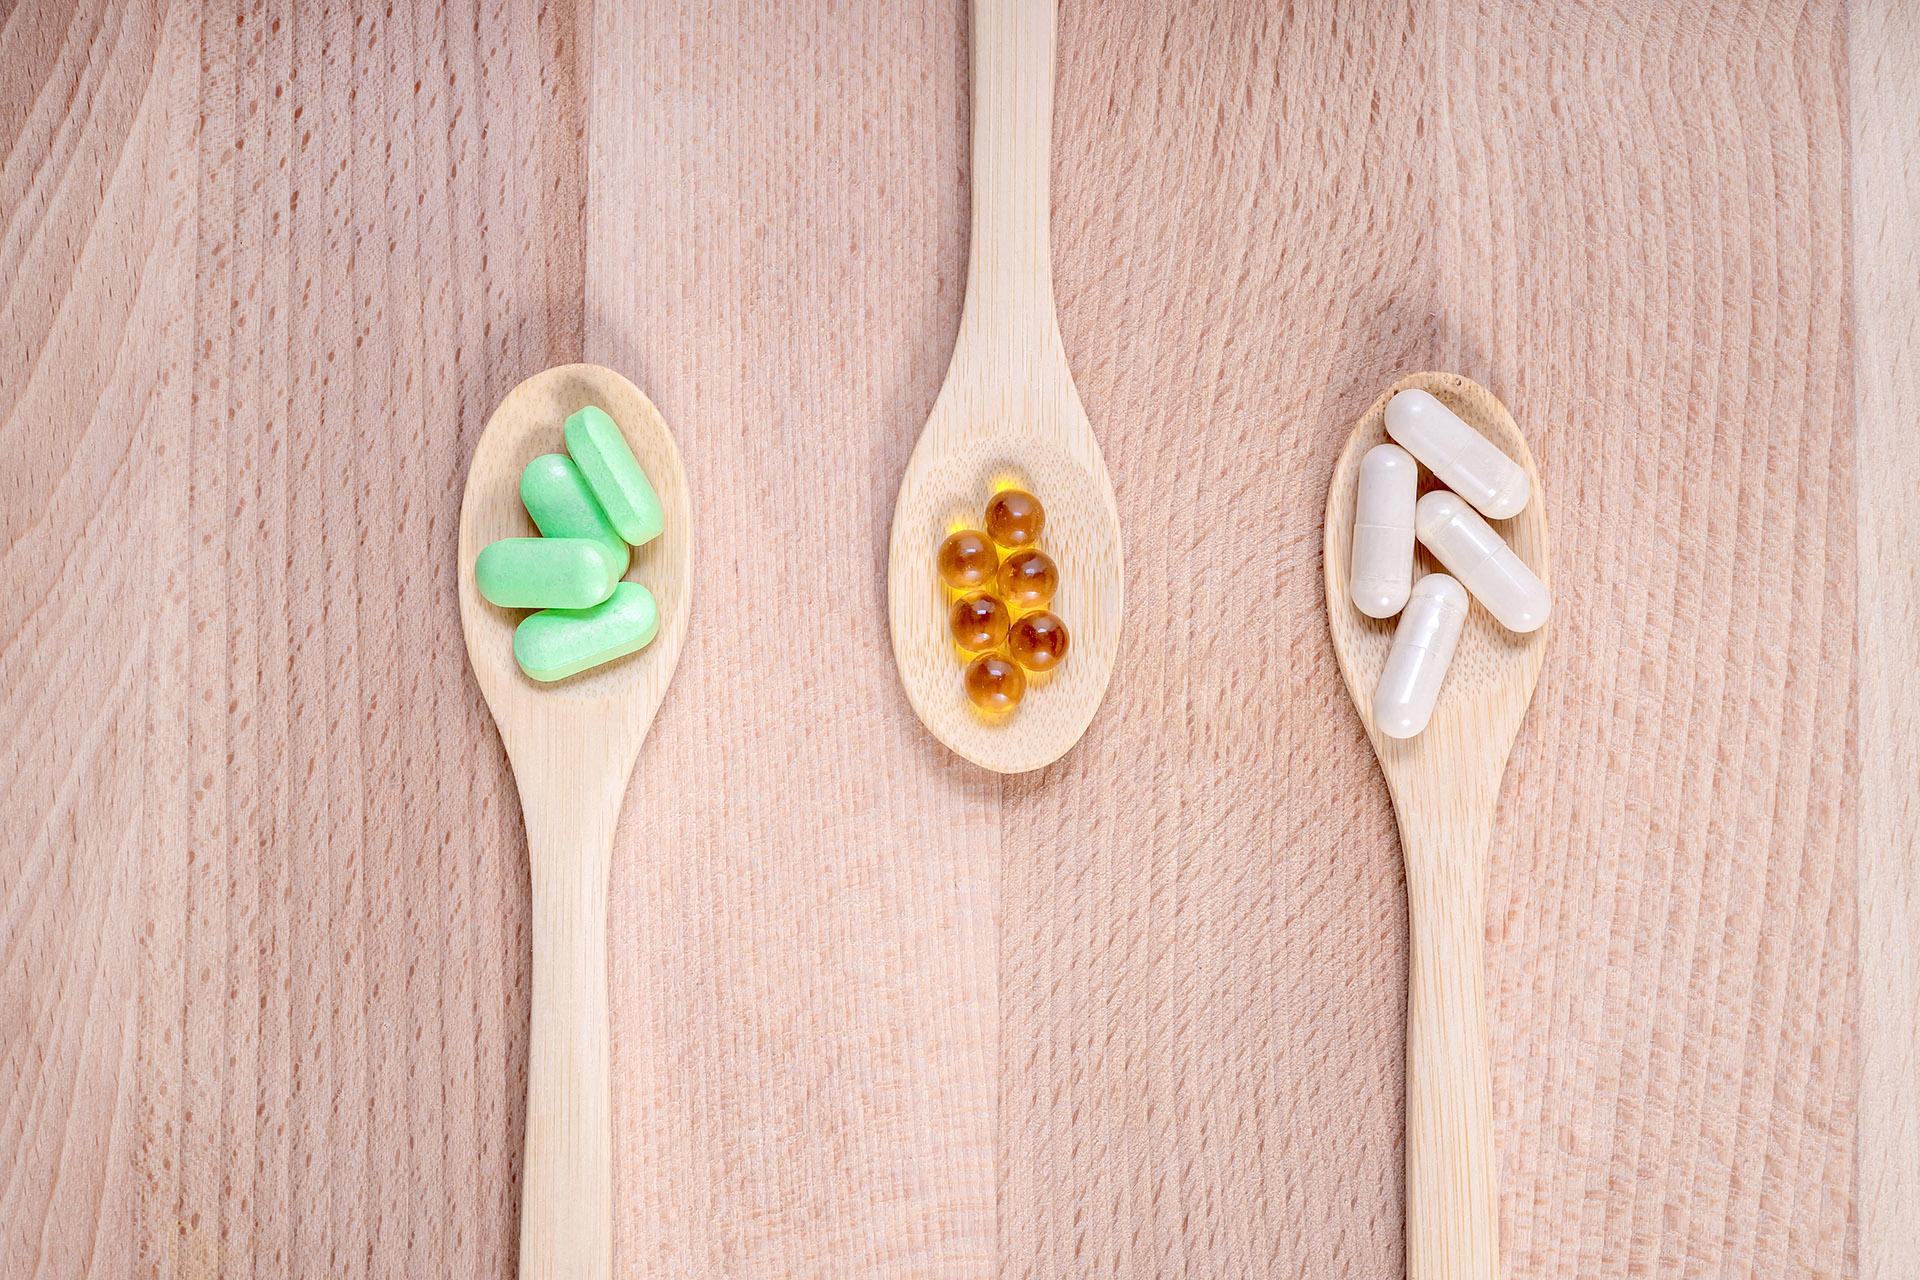 Prebiotic and Probiotic Capsules: Uses, Benefits and Difference